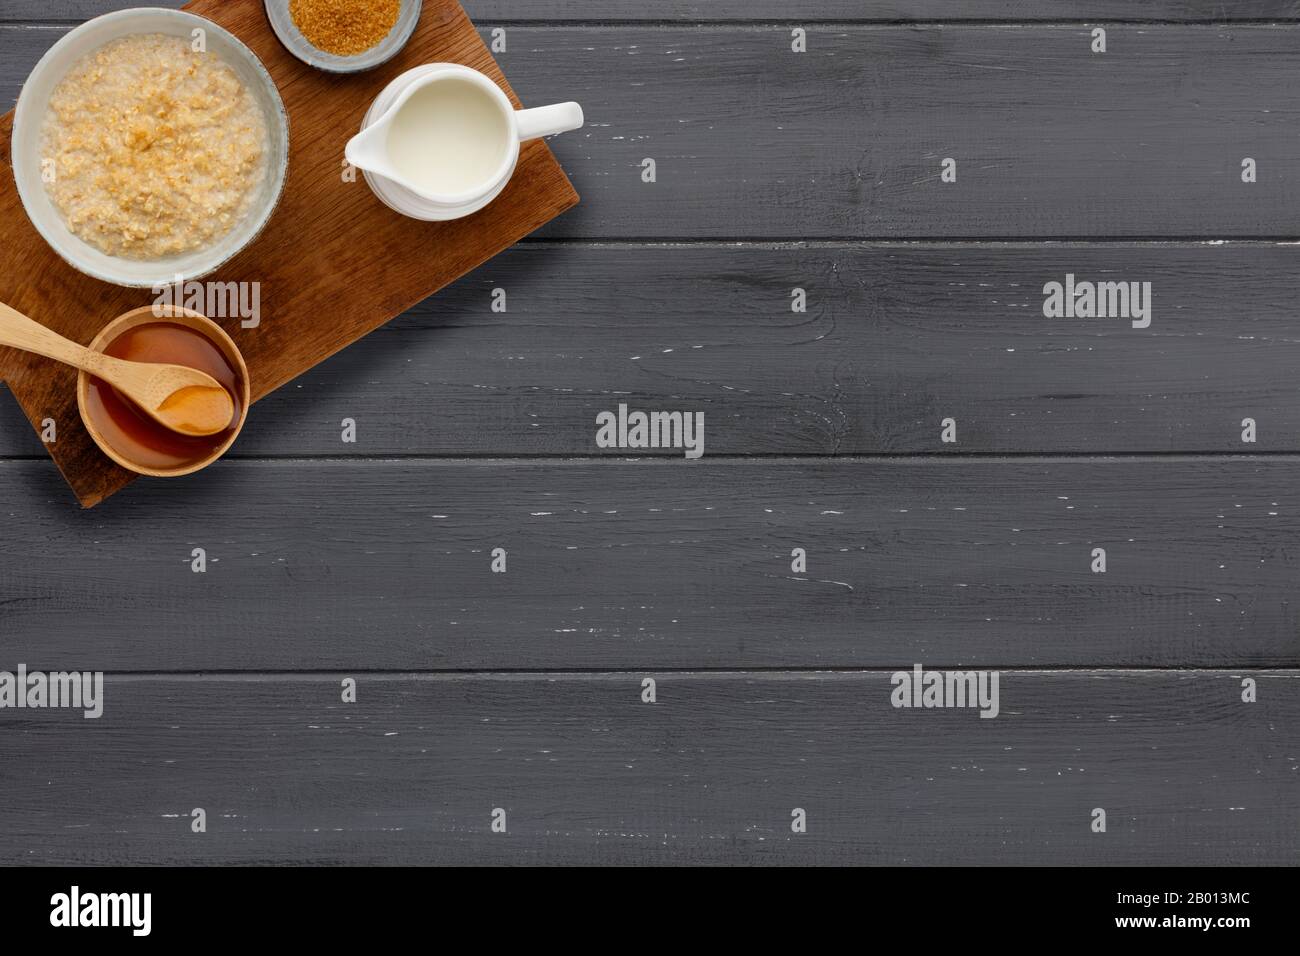 A nutritious bowl of porridge, a small bowl of brown sugar, a jug of milk and a bowl of golden syrup with a wooden spoon, on a dark wooden background, Stock Photo